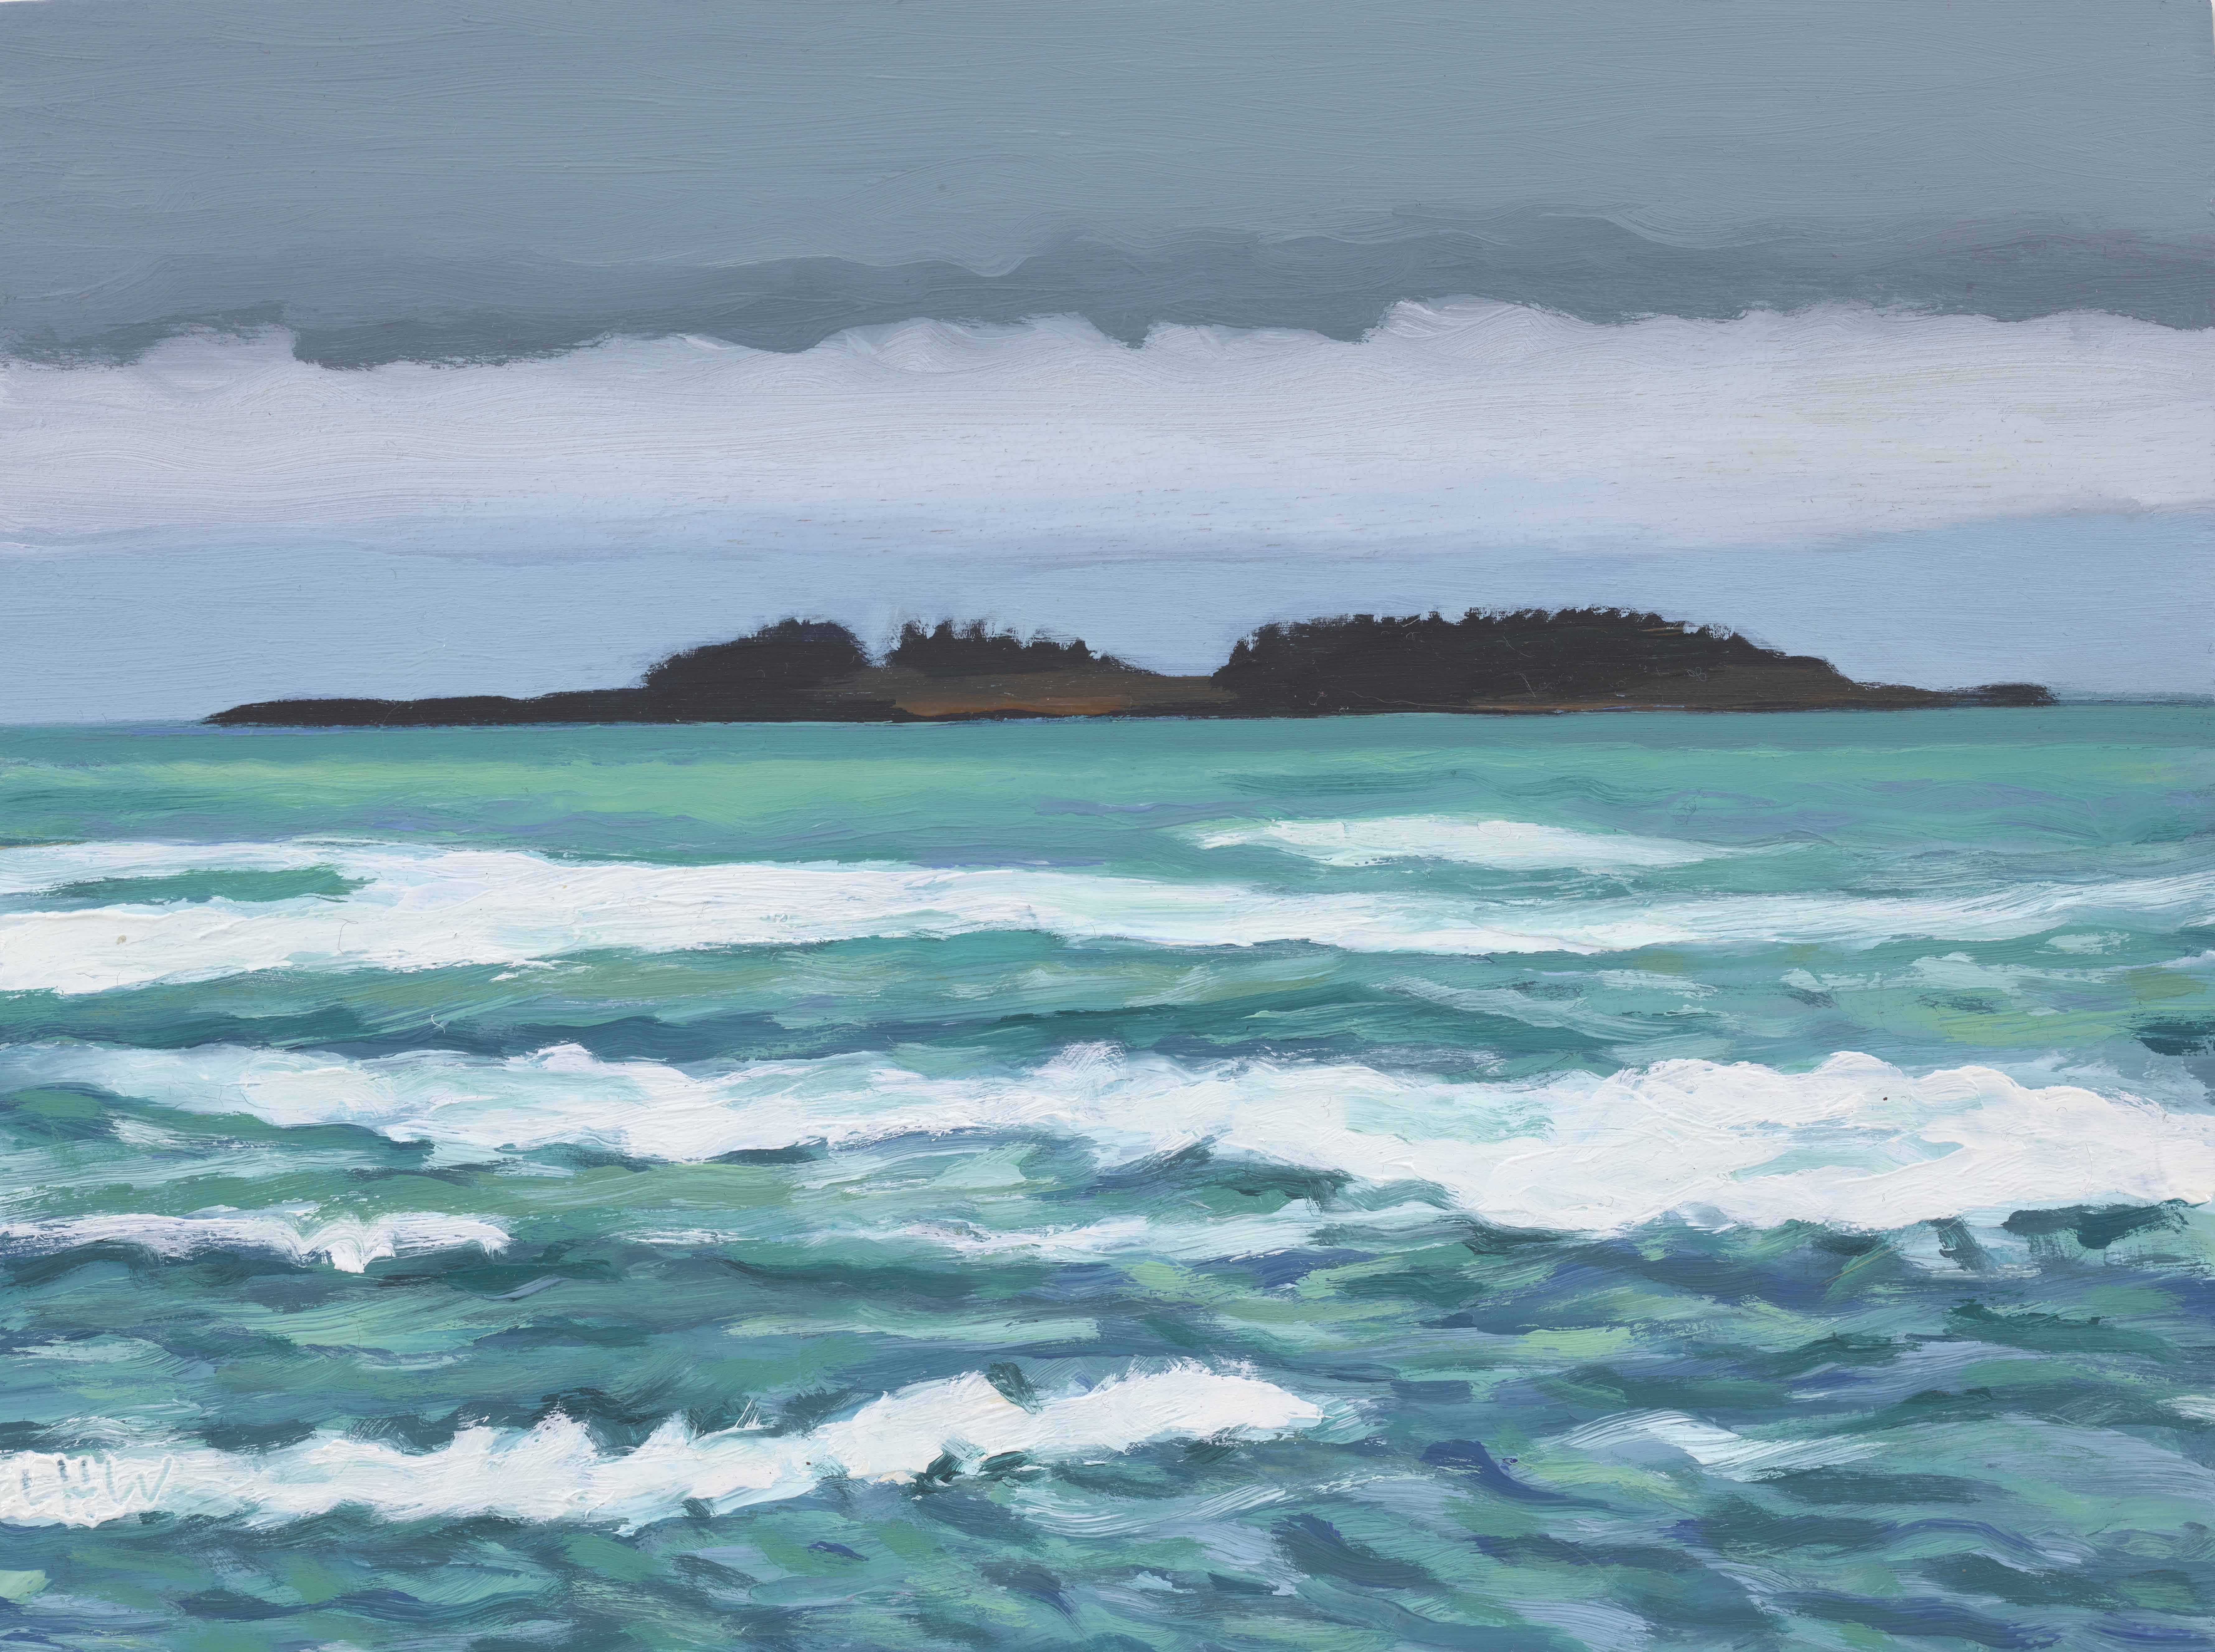 Green Sea, February, 2019, oil on panel, 6 x 8 inches